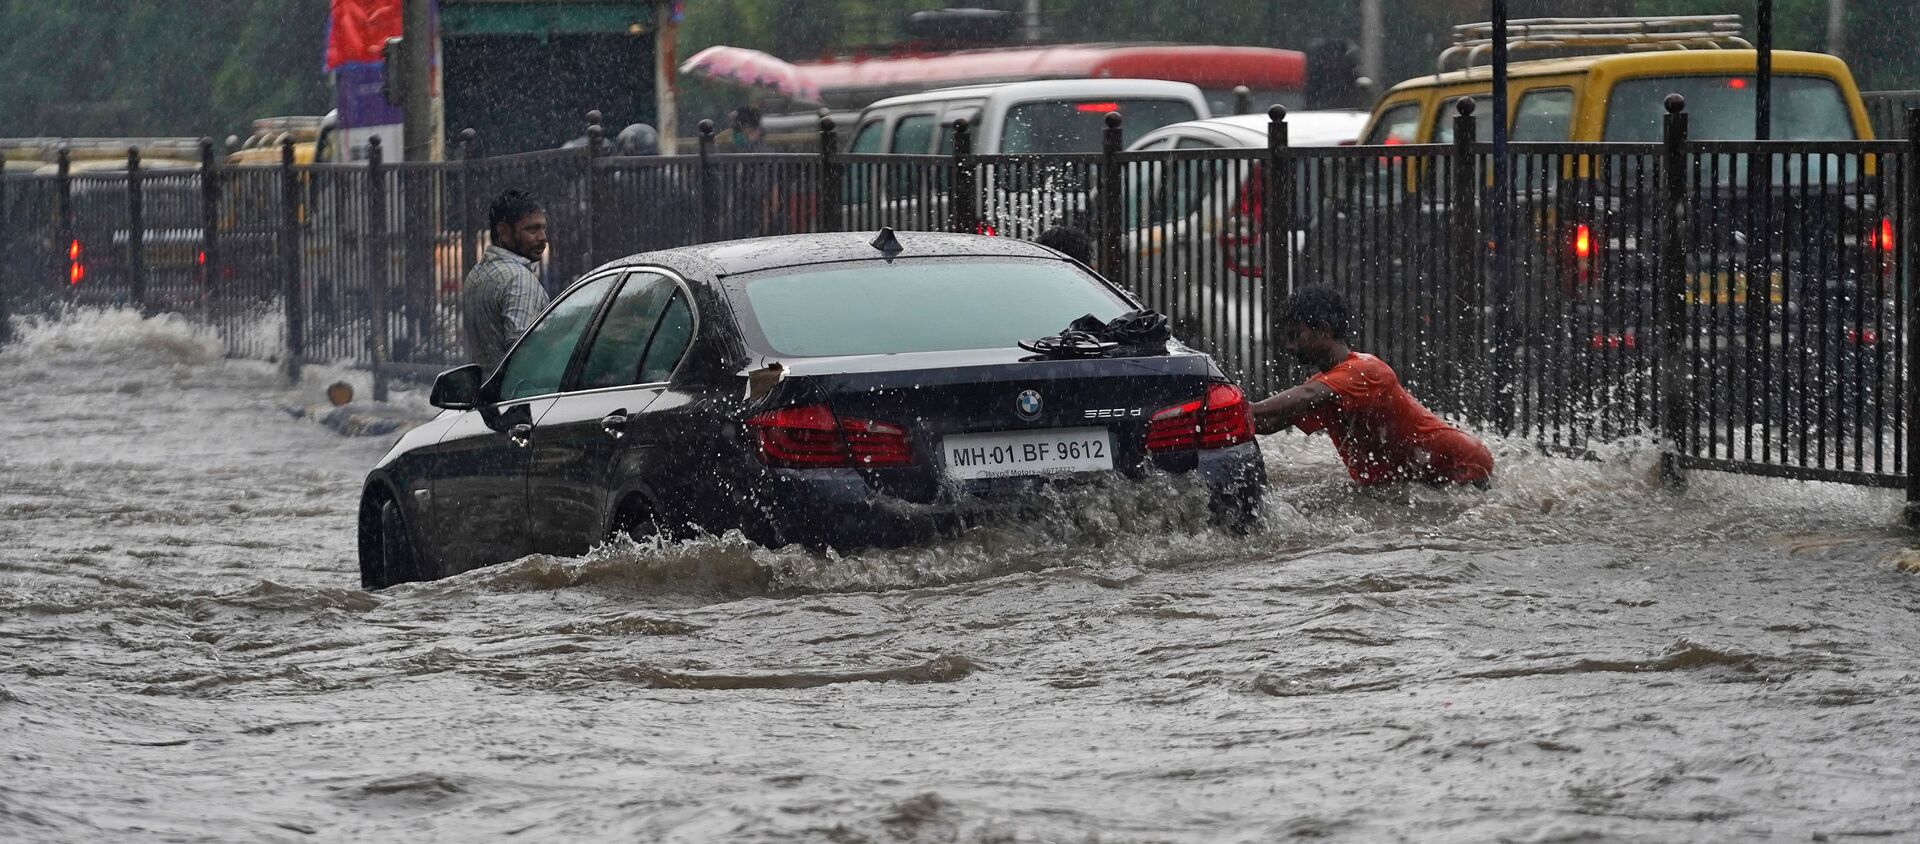 A man pushes a car, stuck in a flooded road, during heavy rains in Mumbai, India - Sputnik International, 1920, 19.07.2020